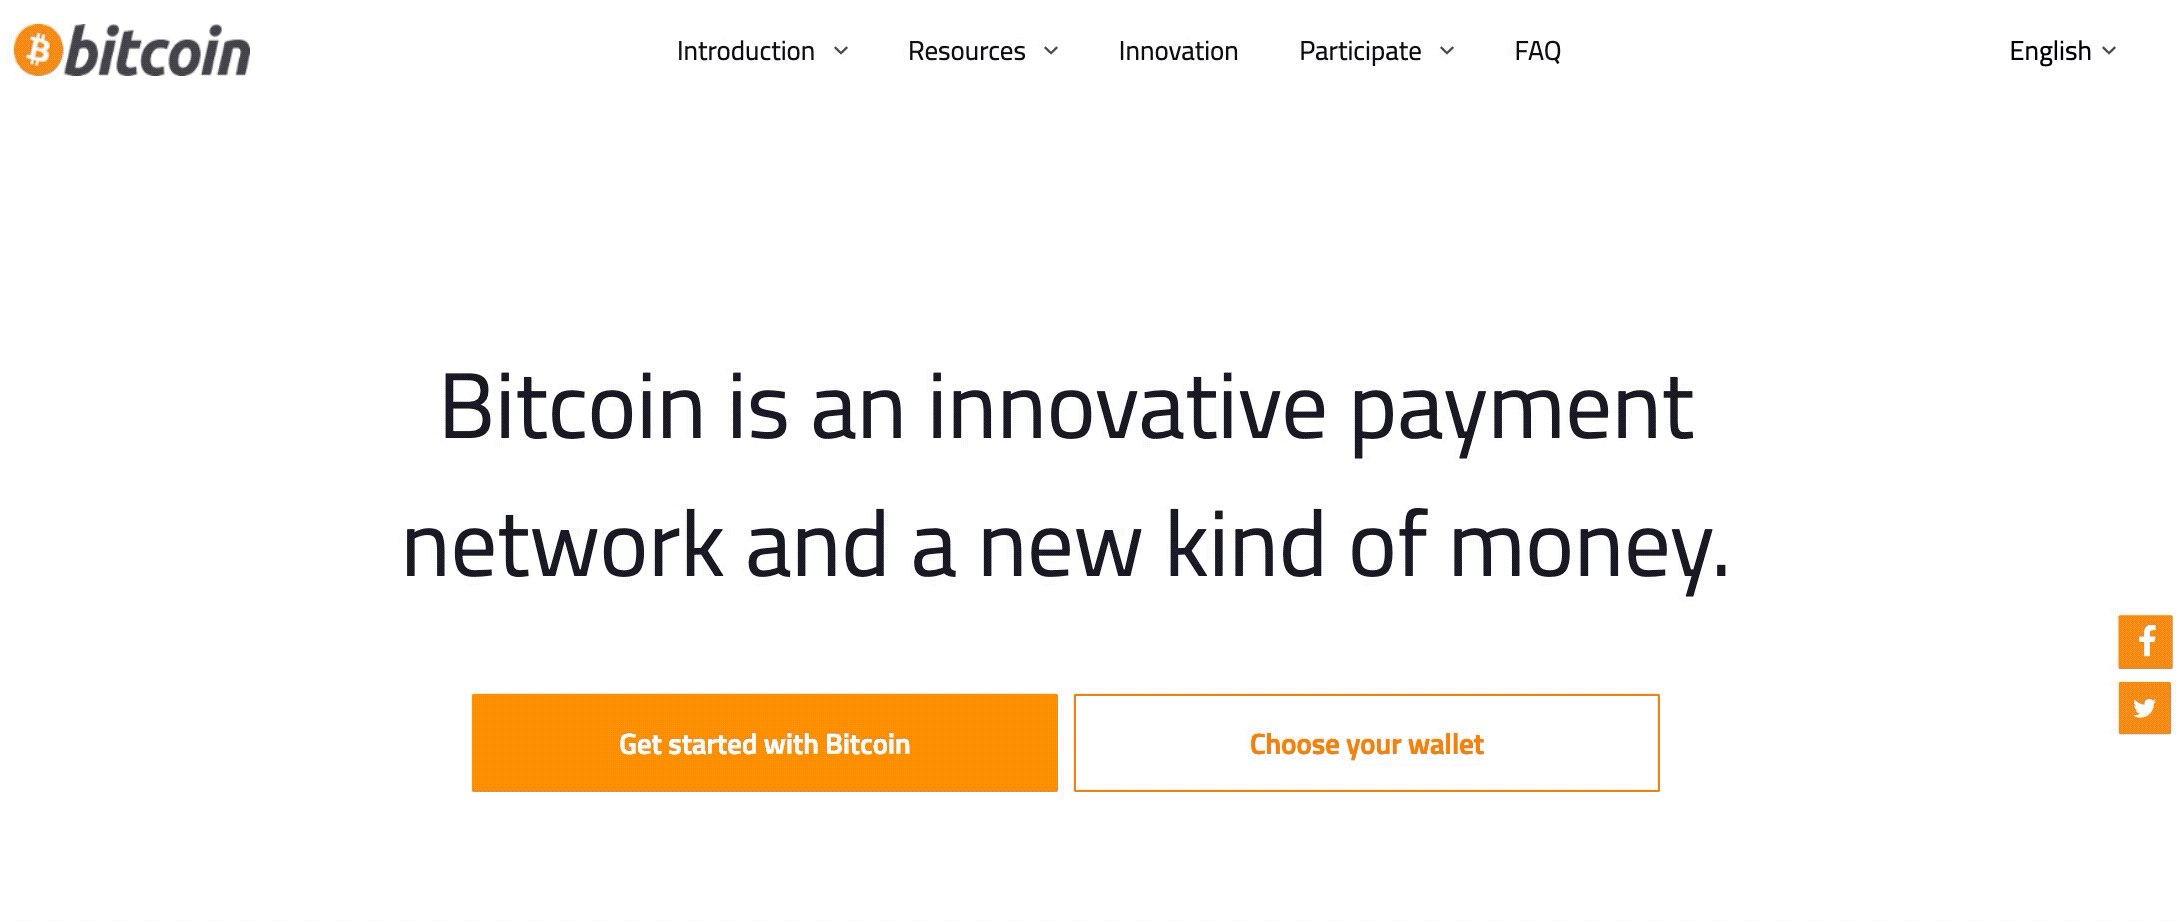 Bitcoin.org Now Available in 25+ Languages